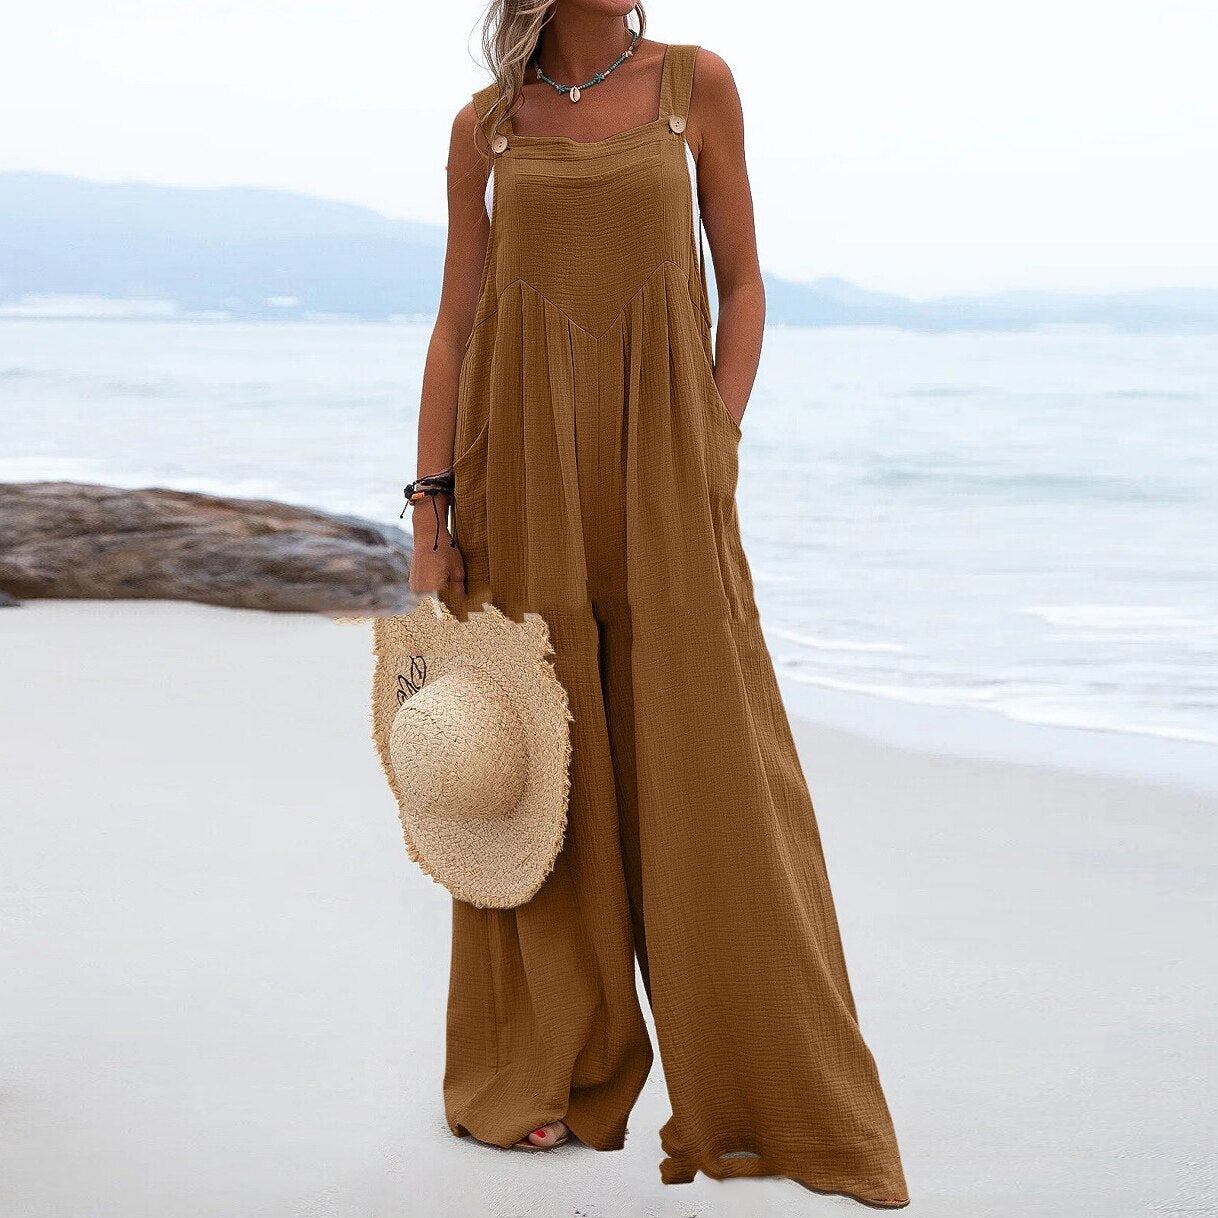 Summer Loose Casual Jumpsuit For Women Cotton Linen Long Romper Solid Holiday Beach Playsuit Strap Button Up Women Jumpsuit - Linions